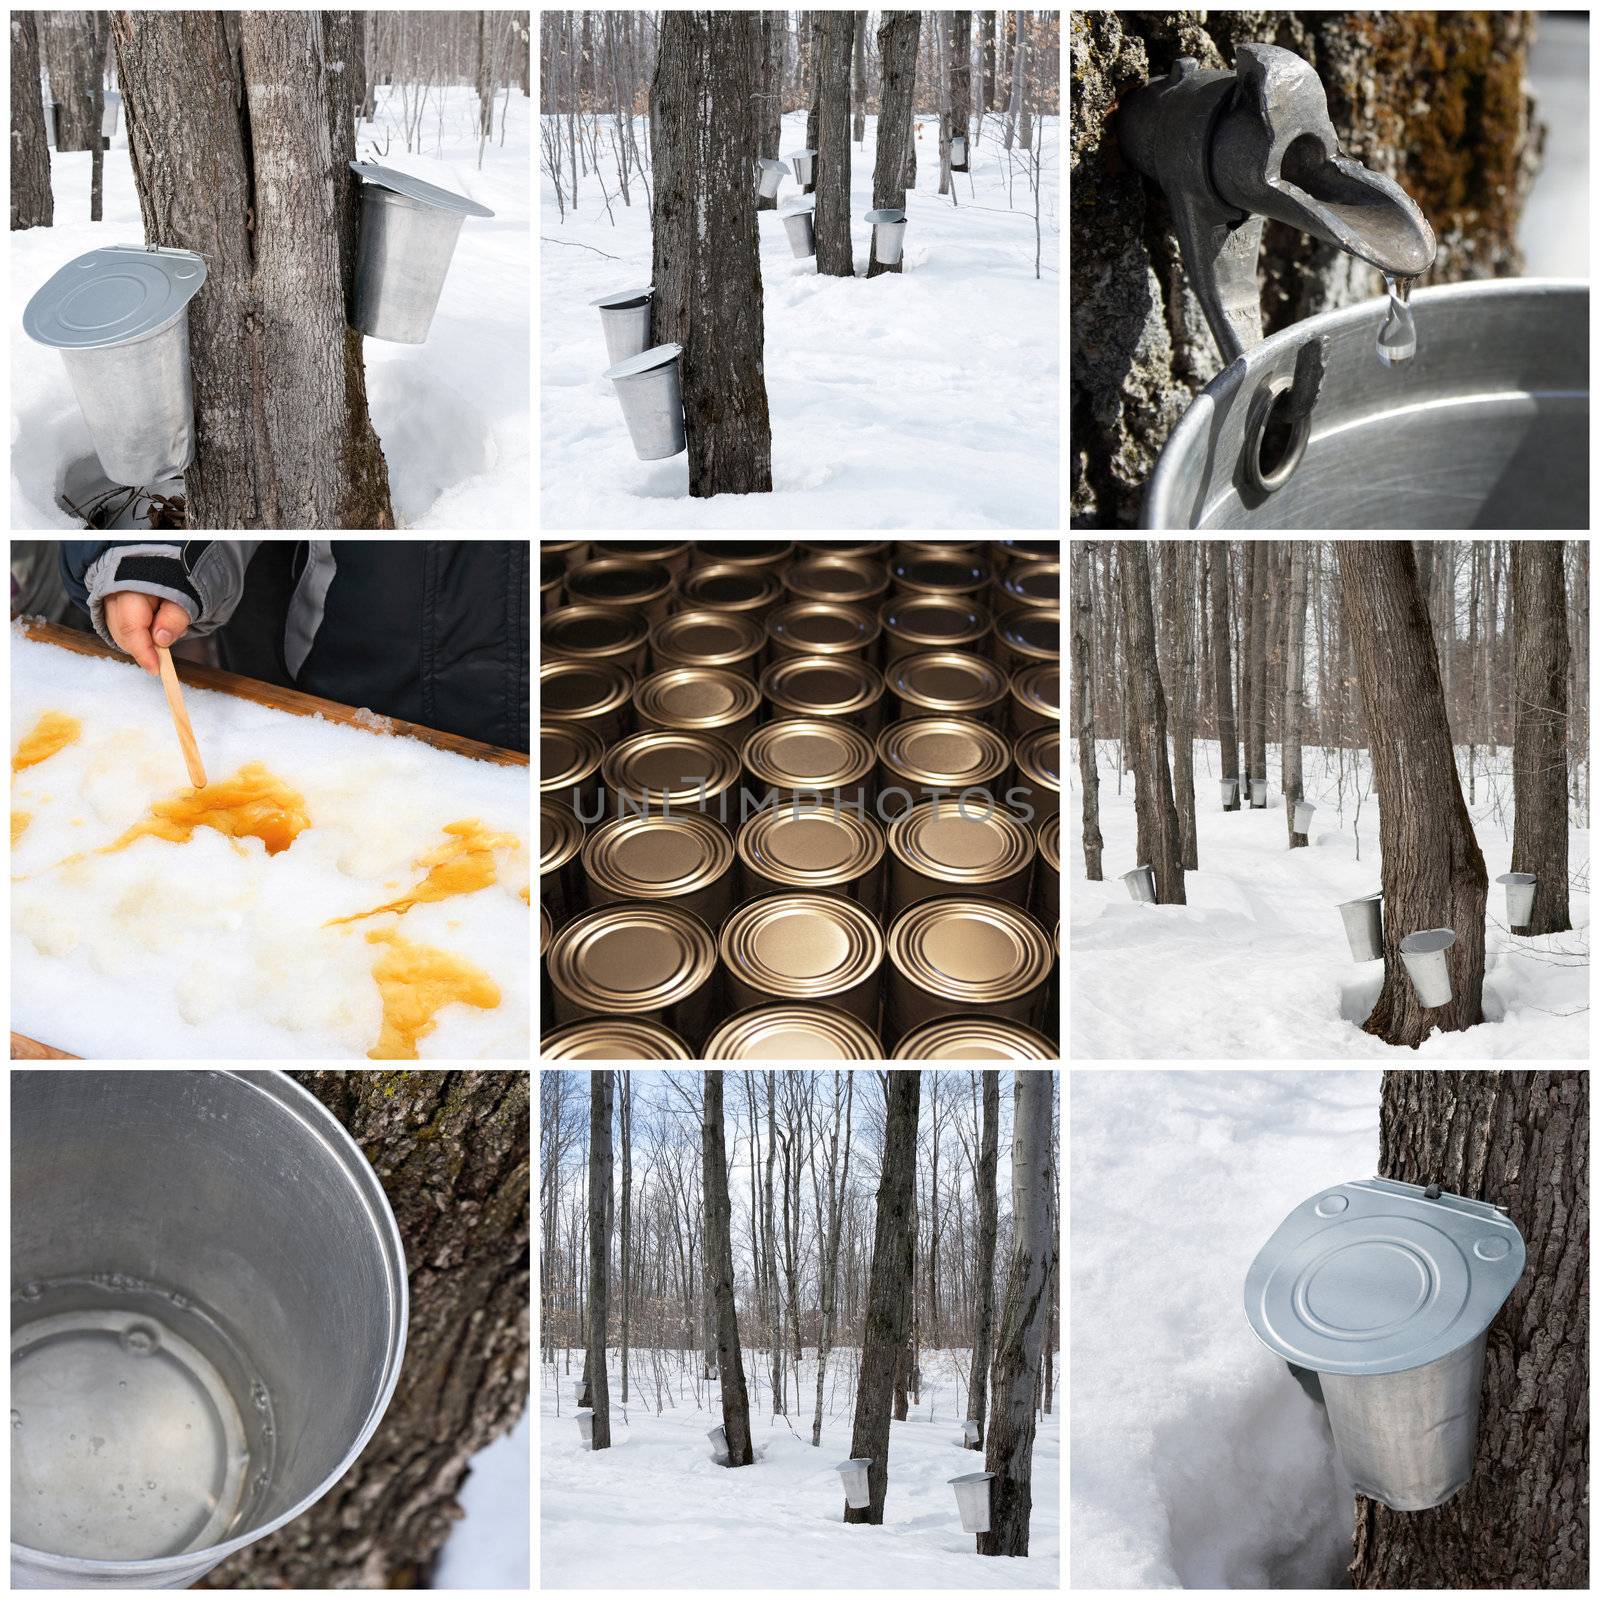 Maple syrup production in Quebec, Canada. Spring forest and buckets for collecting maple sap.